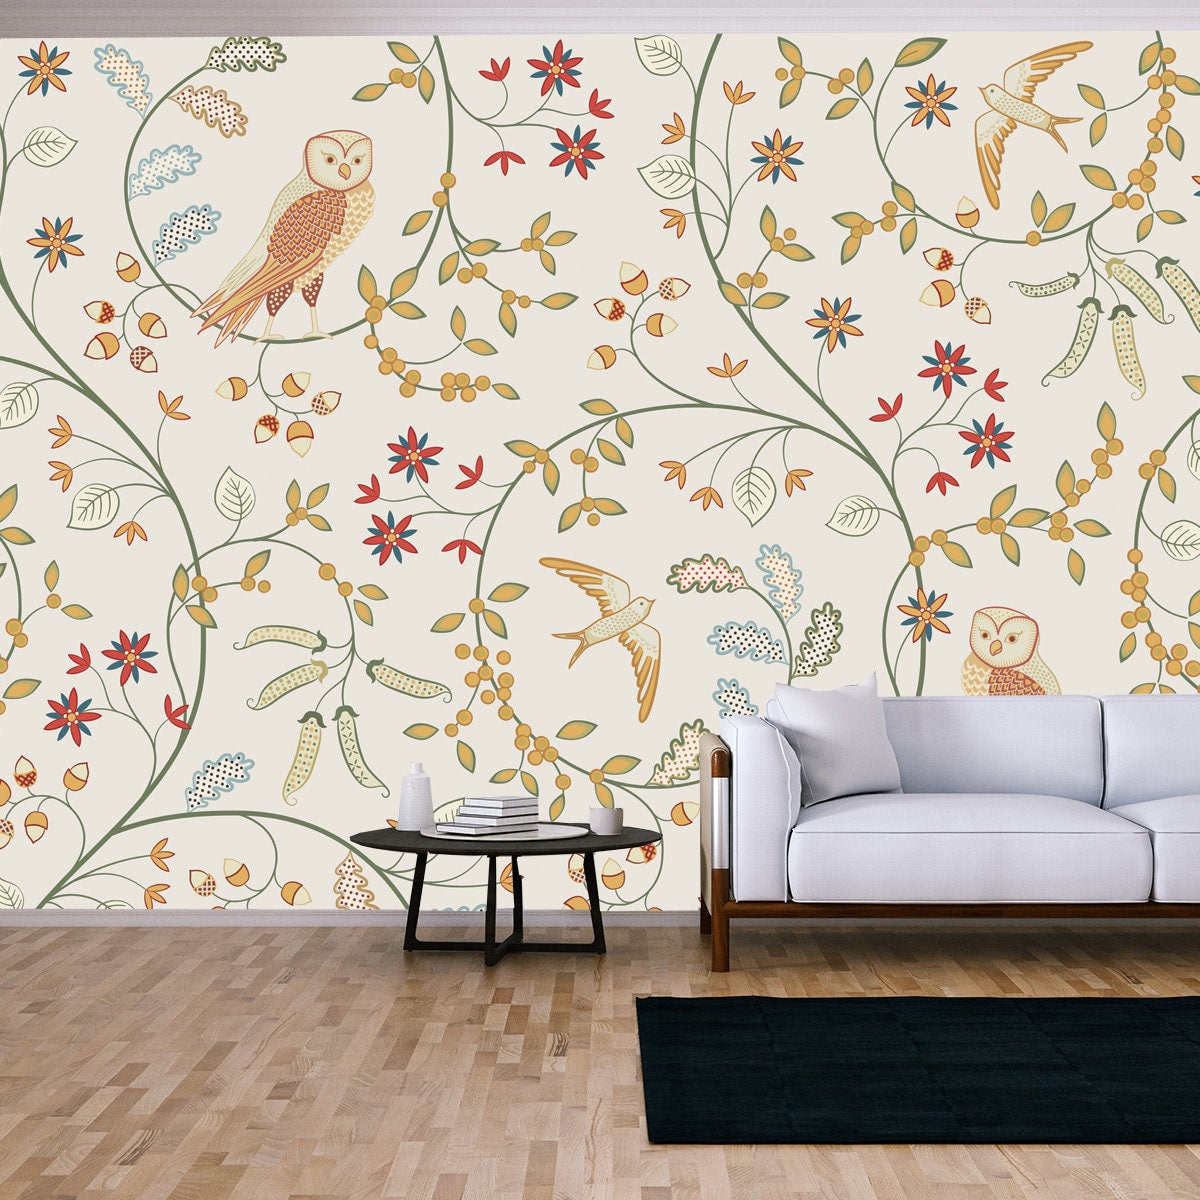 Vintage Birds in Foliage with Flowers Seamless Pattern on Light Background. Middle Ages William Morris Style Wallpaper Living Room Mural